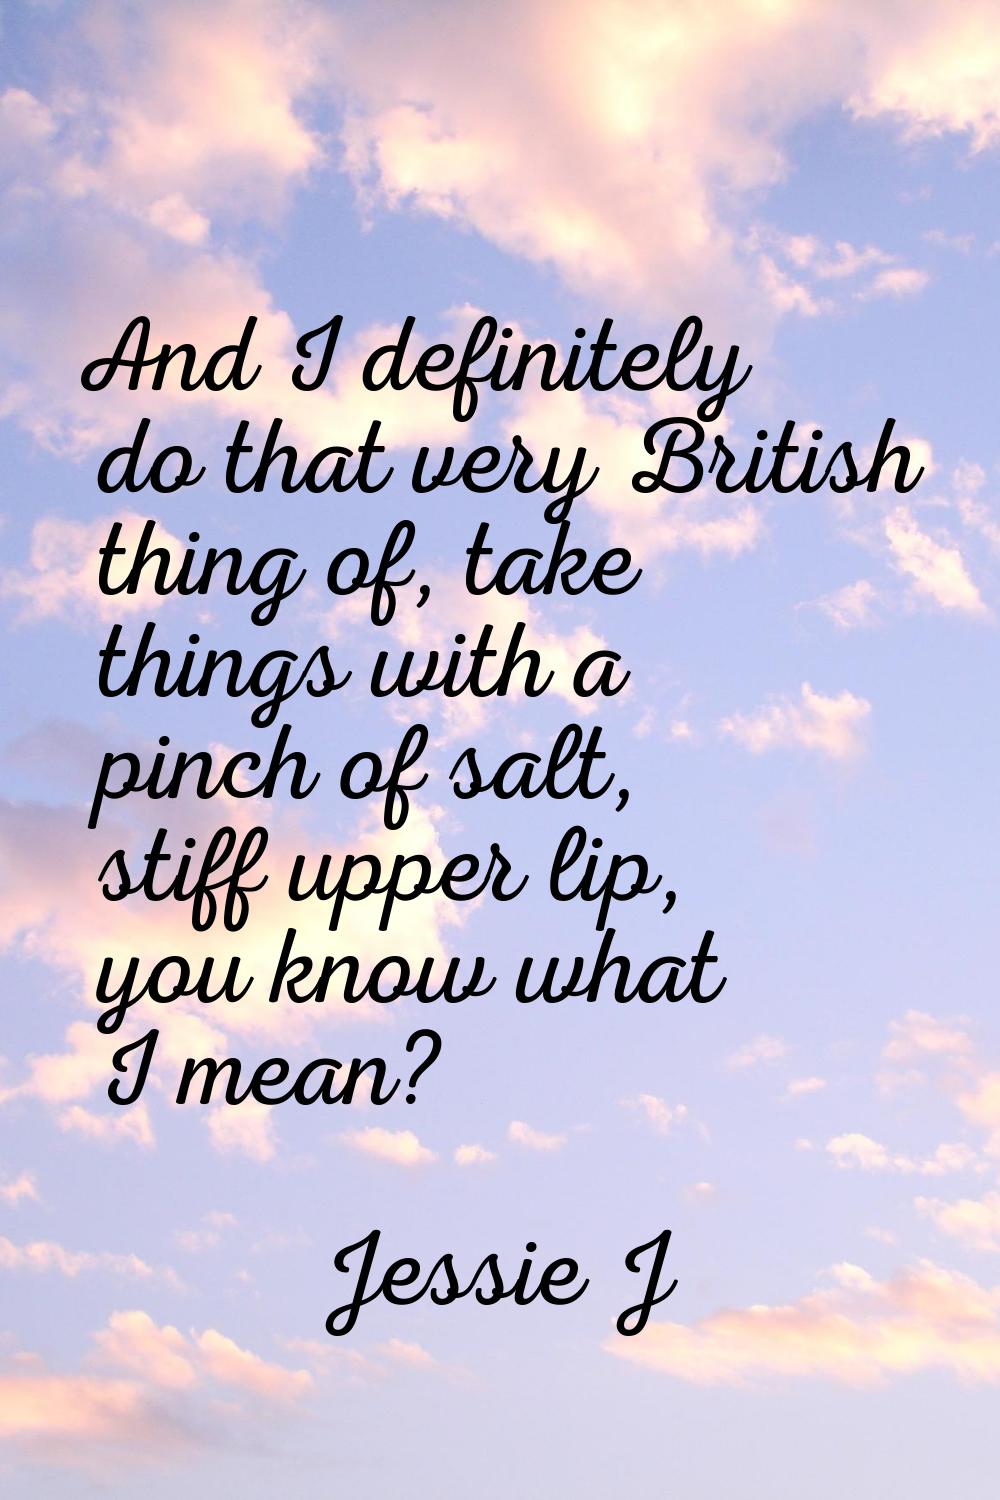 And I definitely do that very British thing of, take things with a pinch of salt, stiff upper lip, 